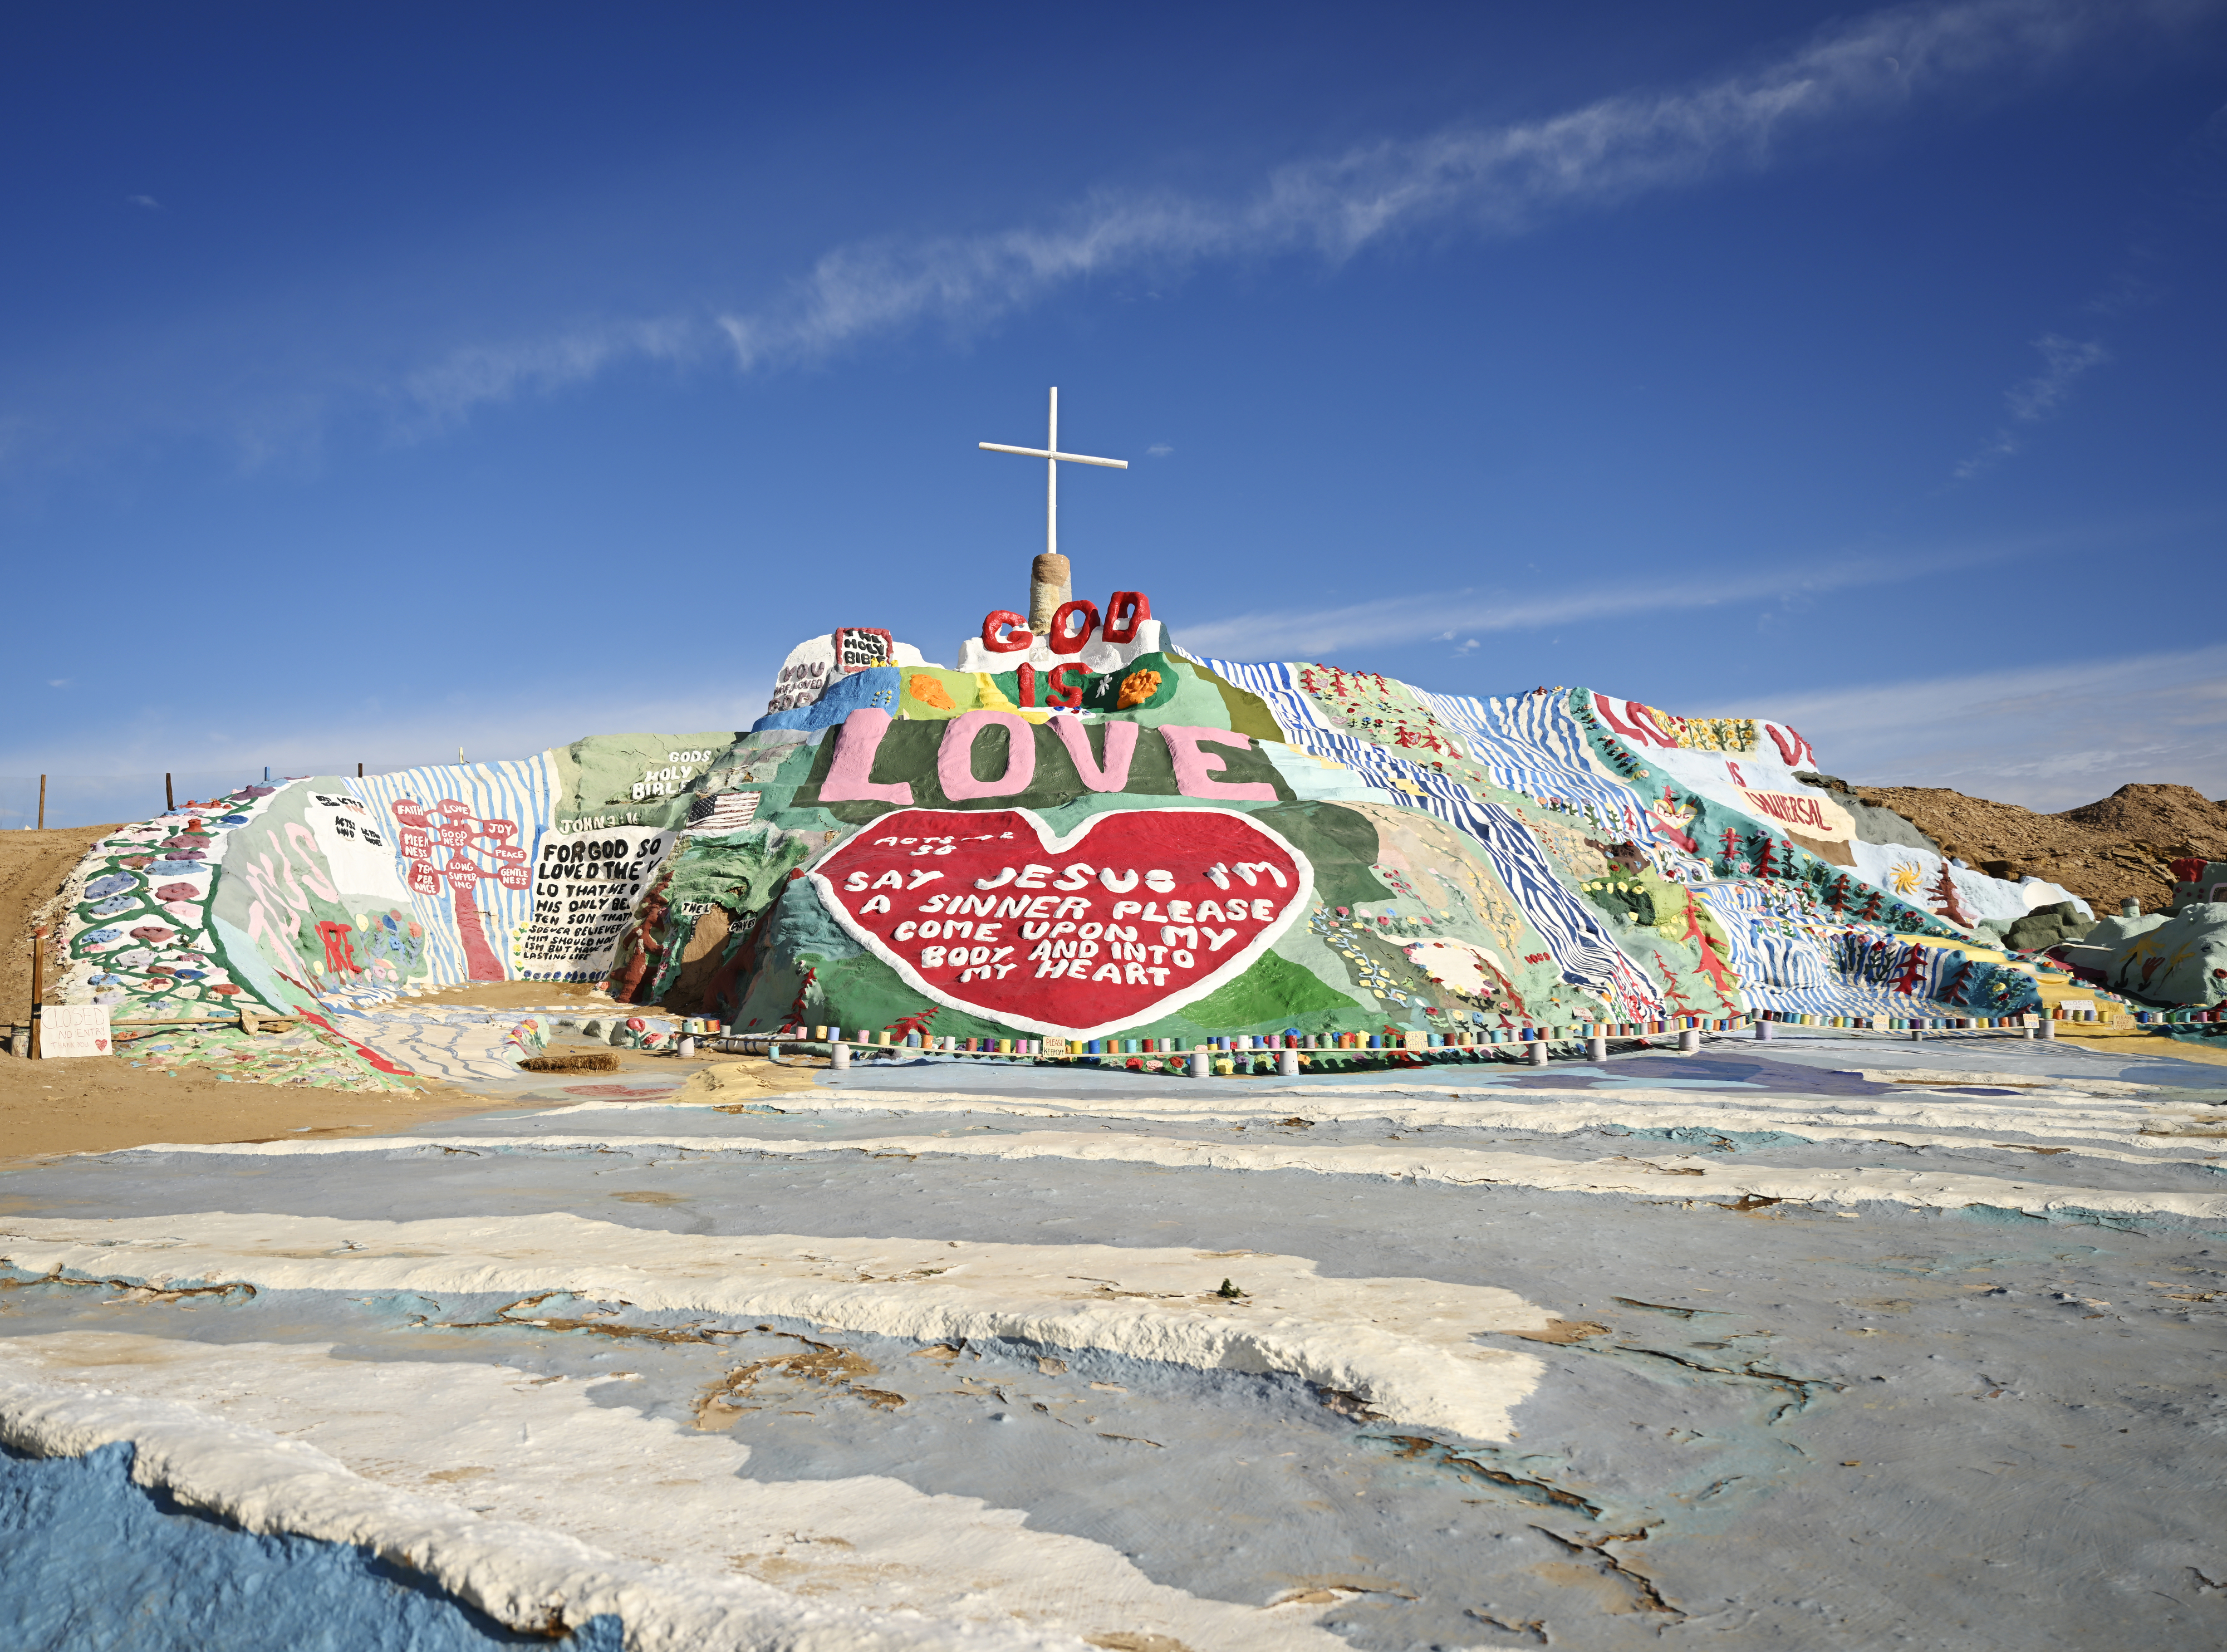 Salvation Mountain artistic landmark with religious and philosophical messages painted on a hill